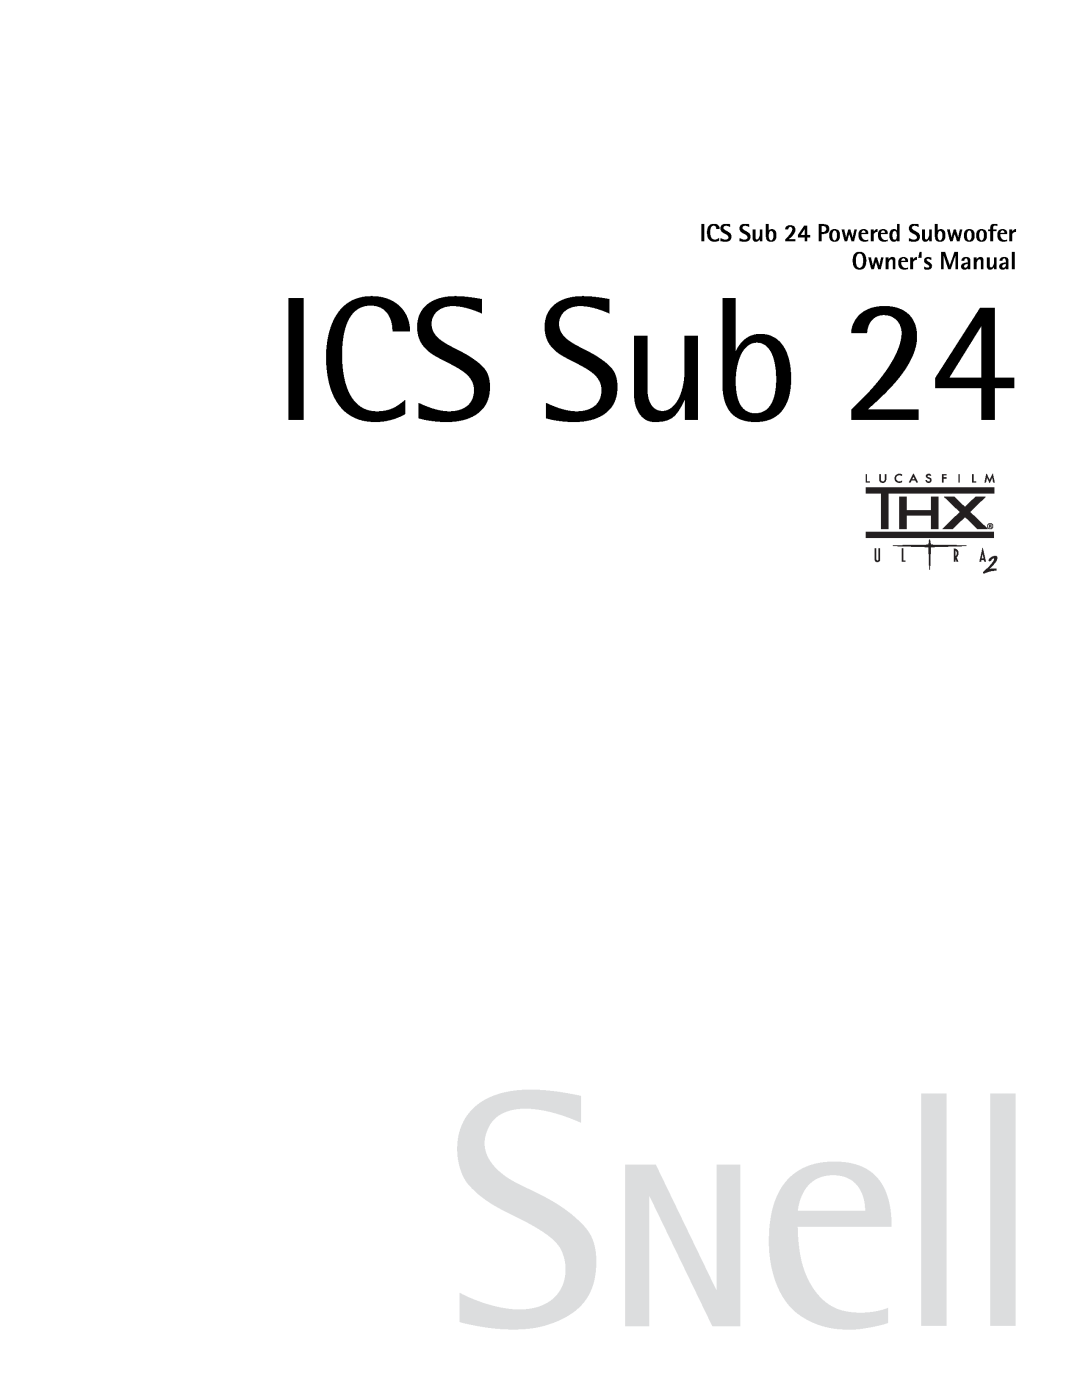 Snell Acoustics owner manual ICS Sub 24 Powered Subwoofer Owner‘s Manual 